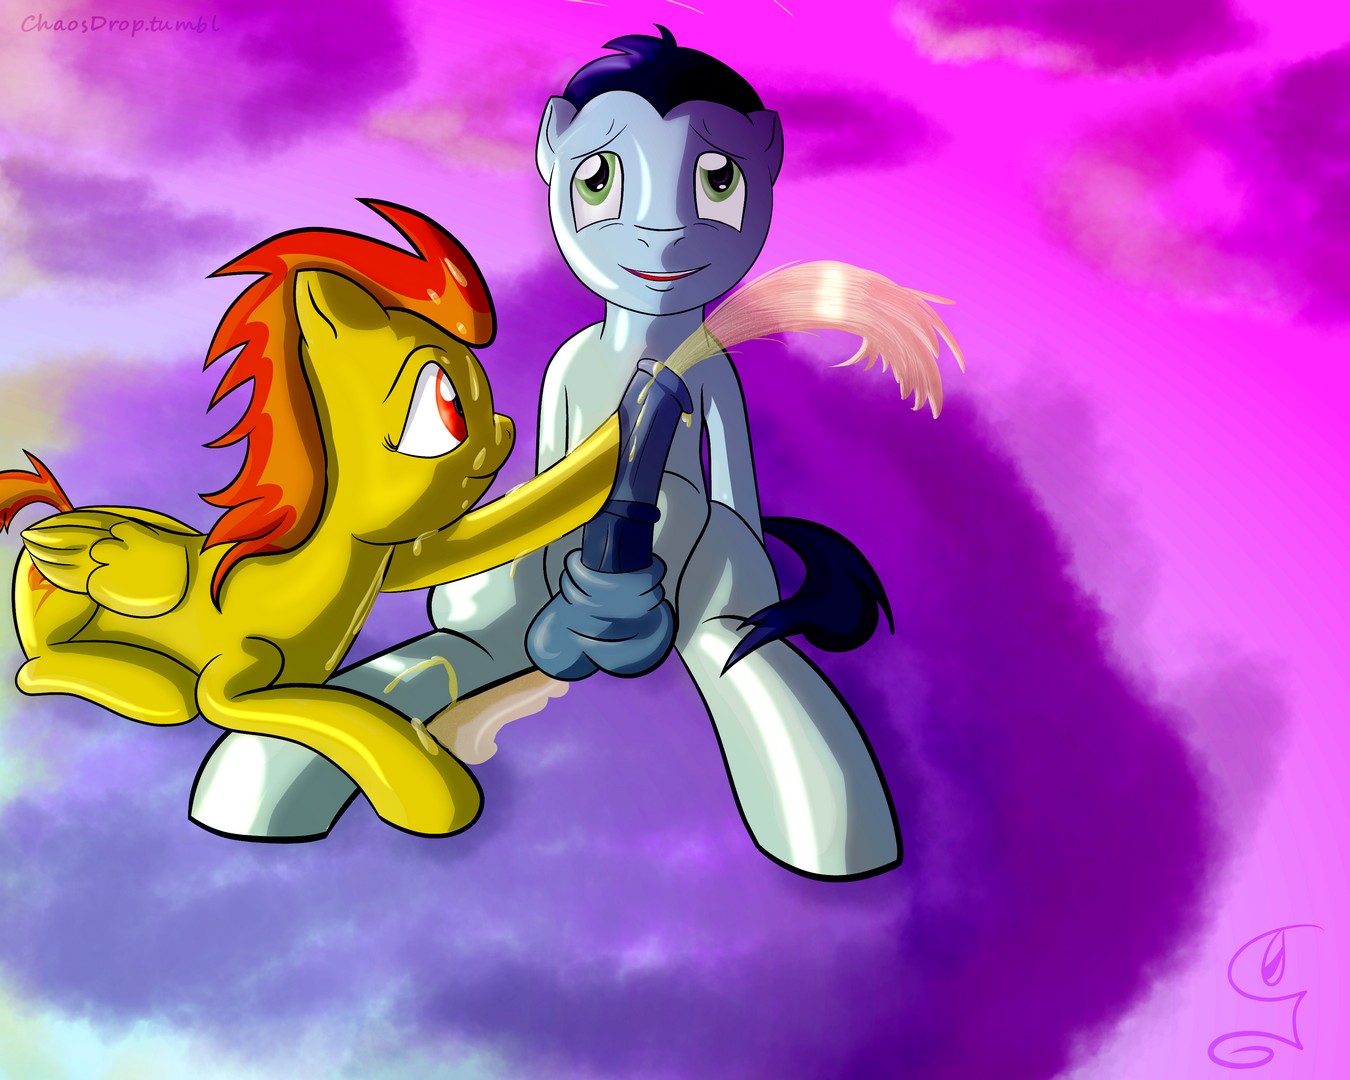 Soarin And Spitfire Clop Porn Spitfire And Soarin Porn Soarin And Spitfire Porn